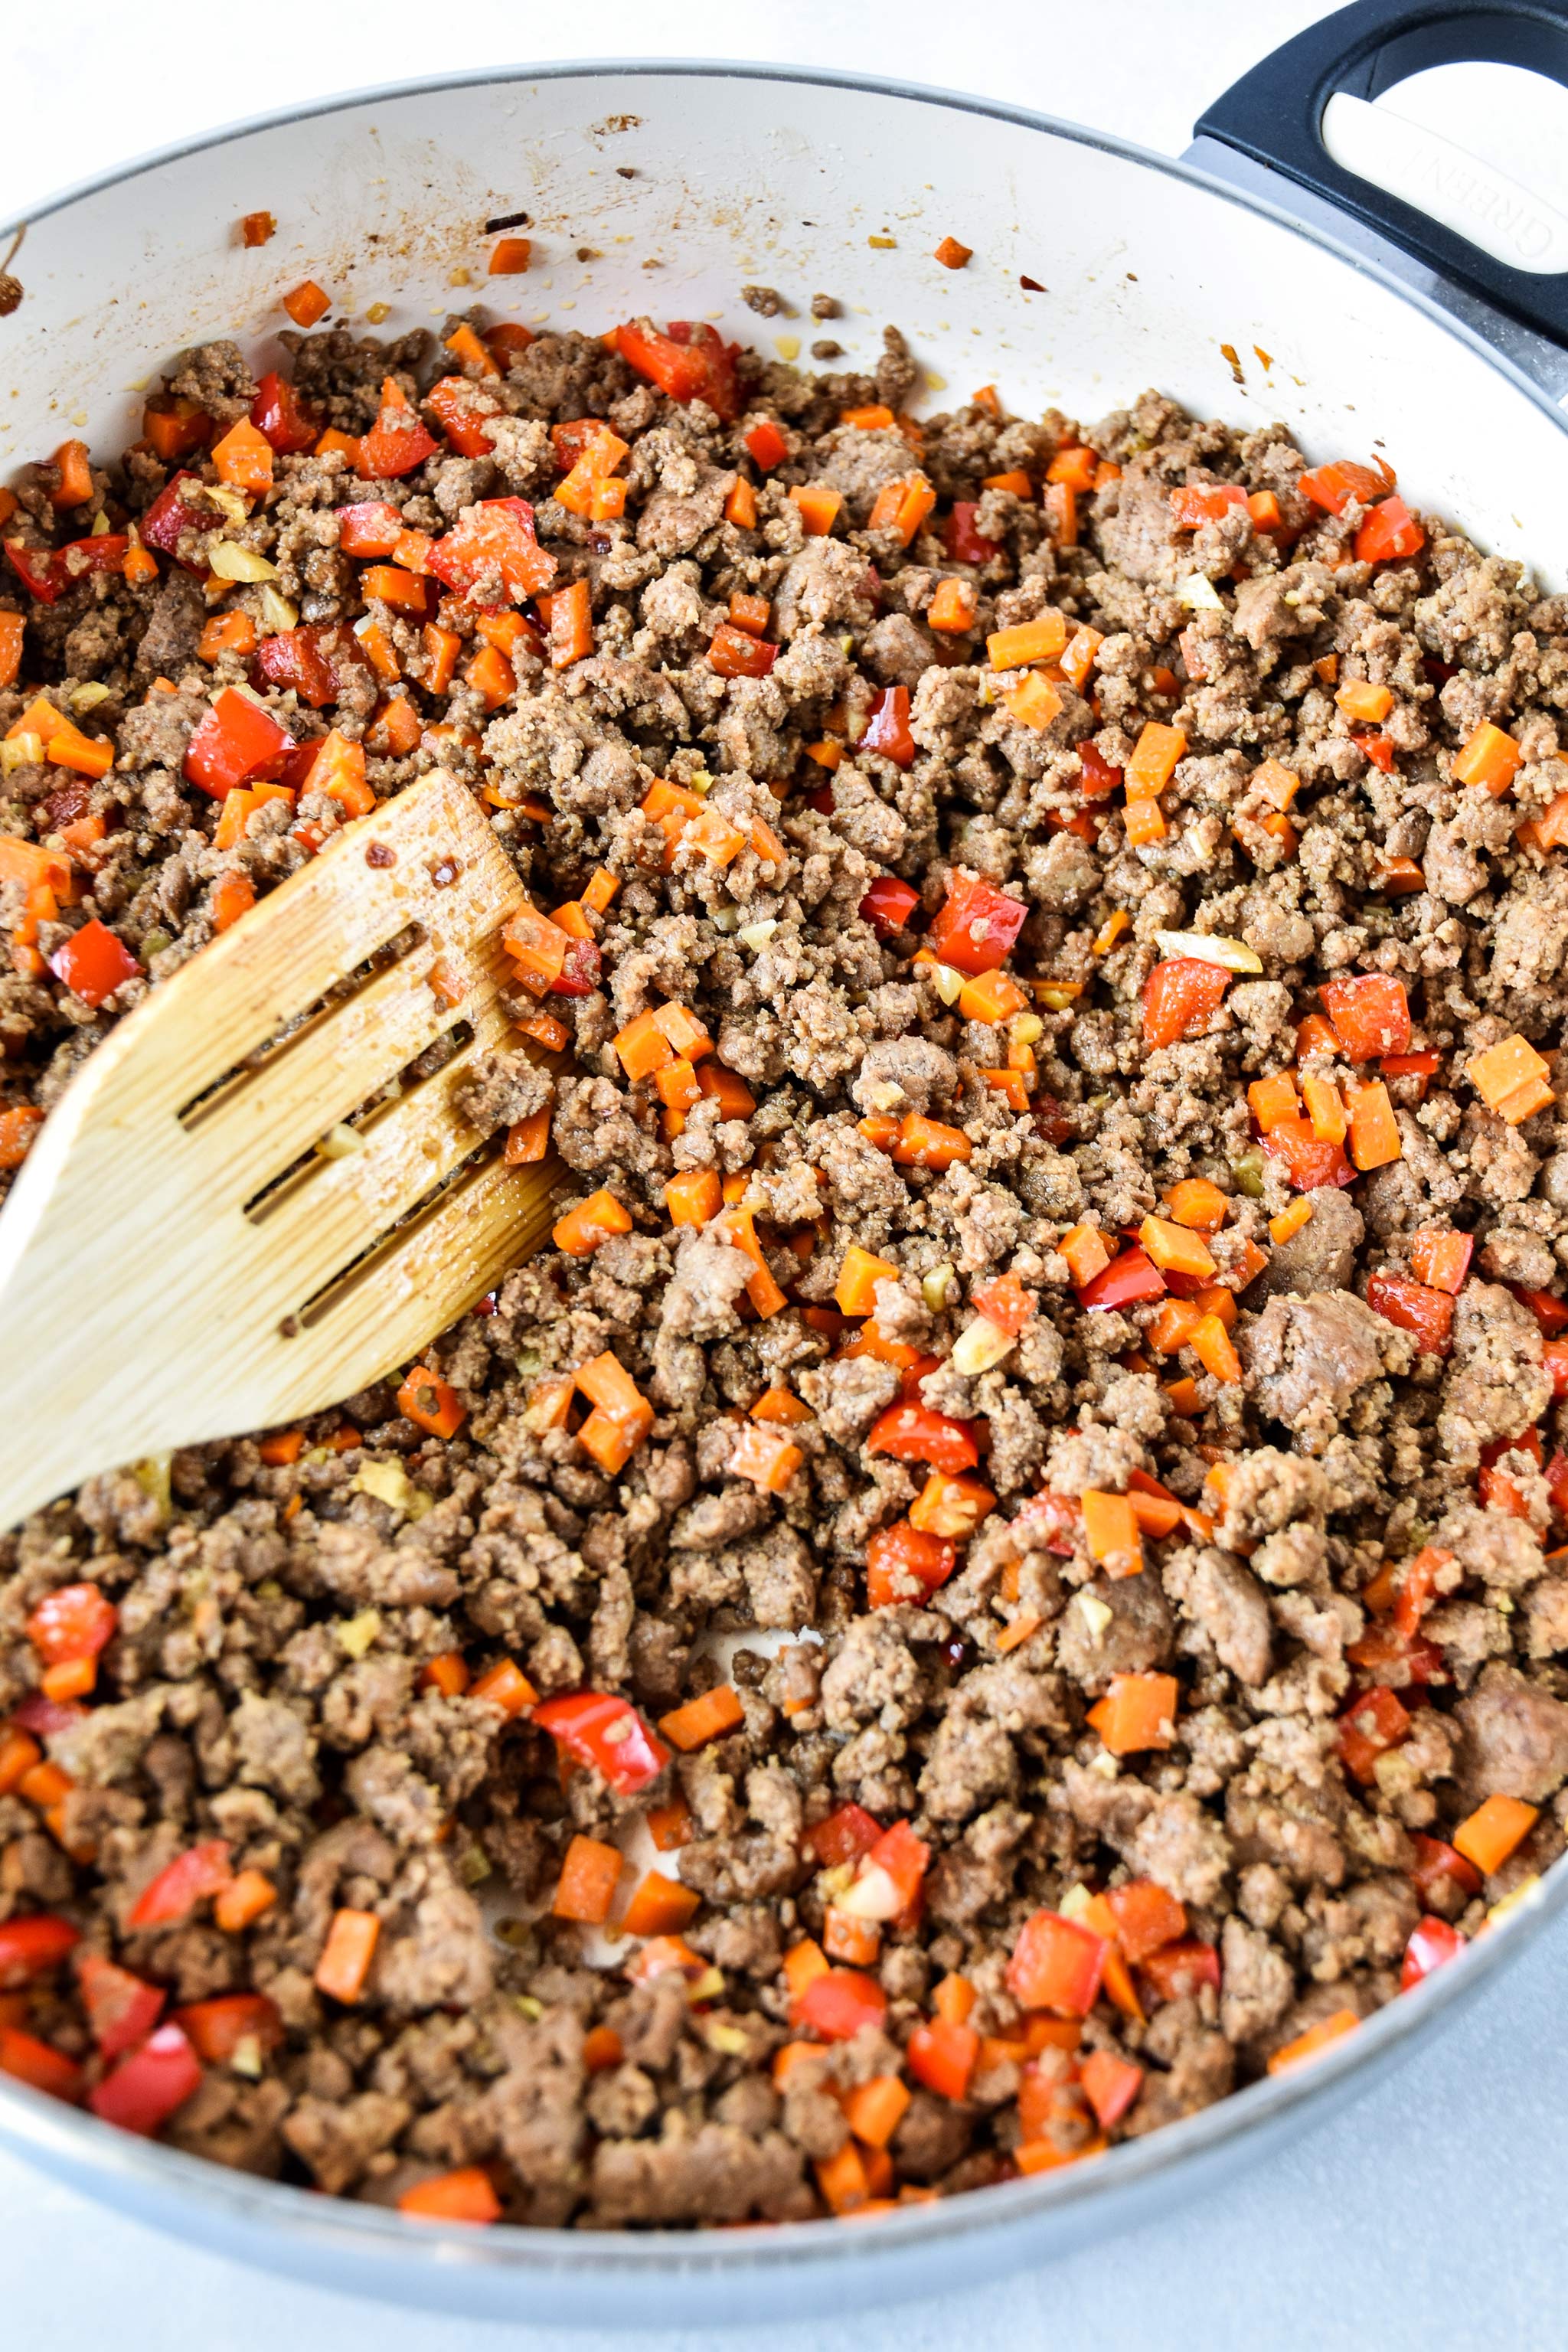 ginger ground beef bowls cooked in a skillet